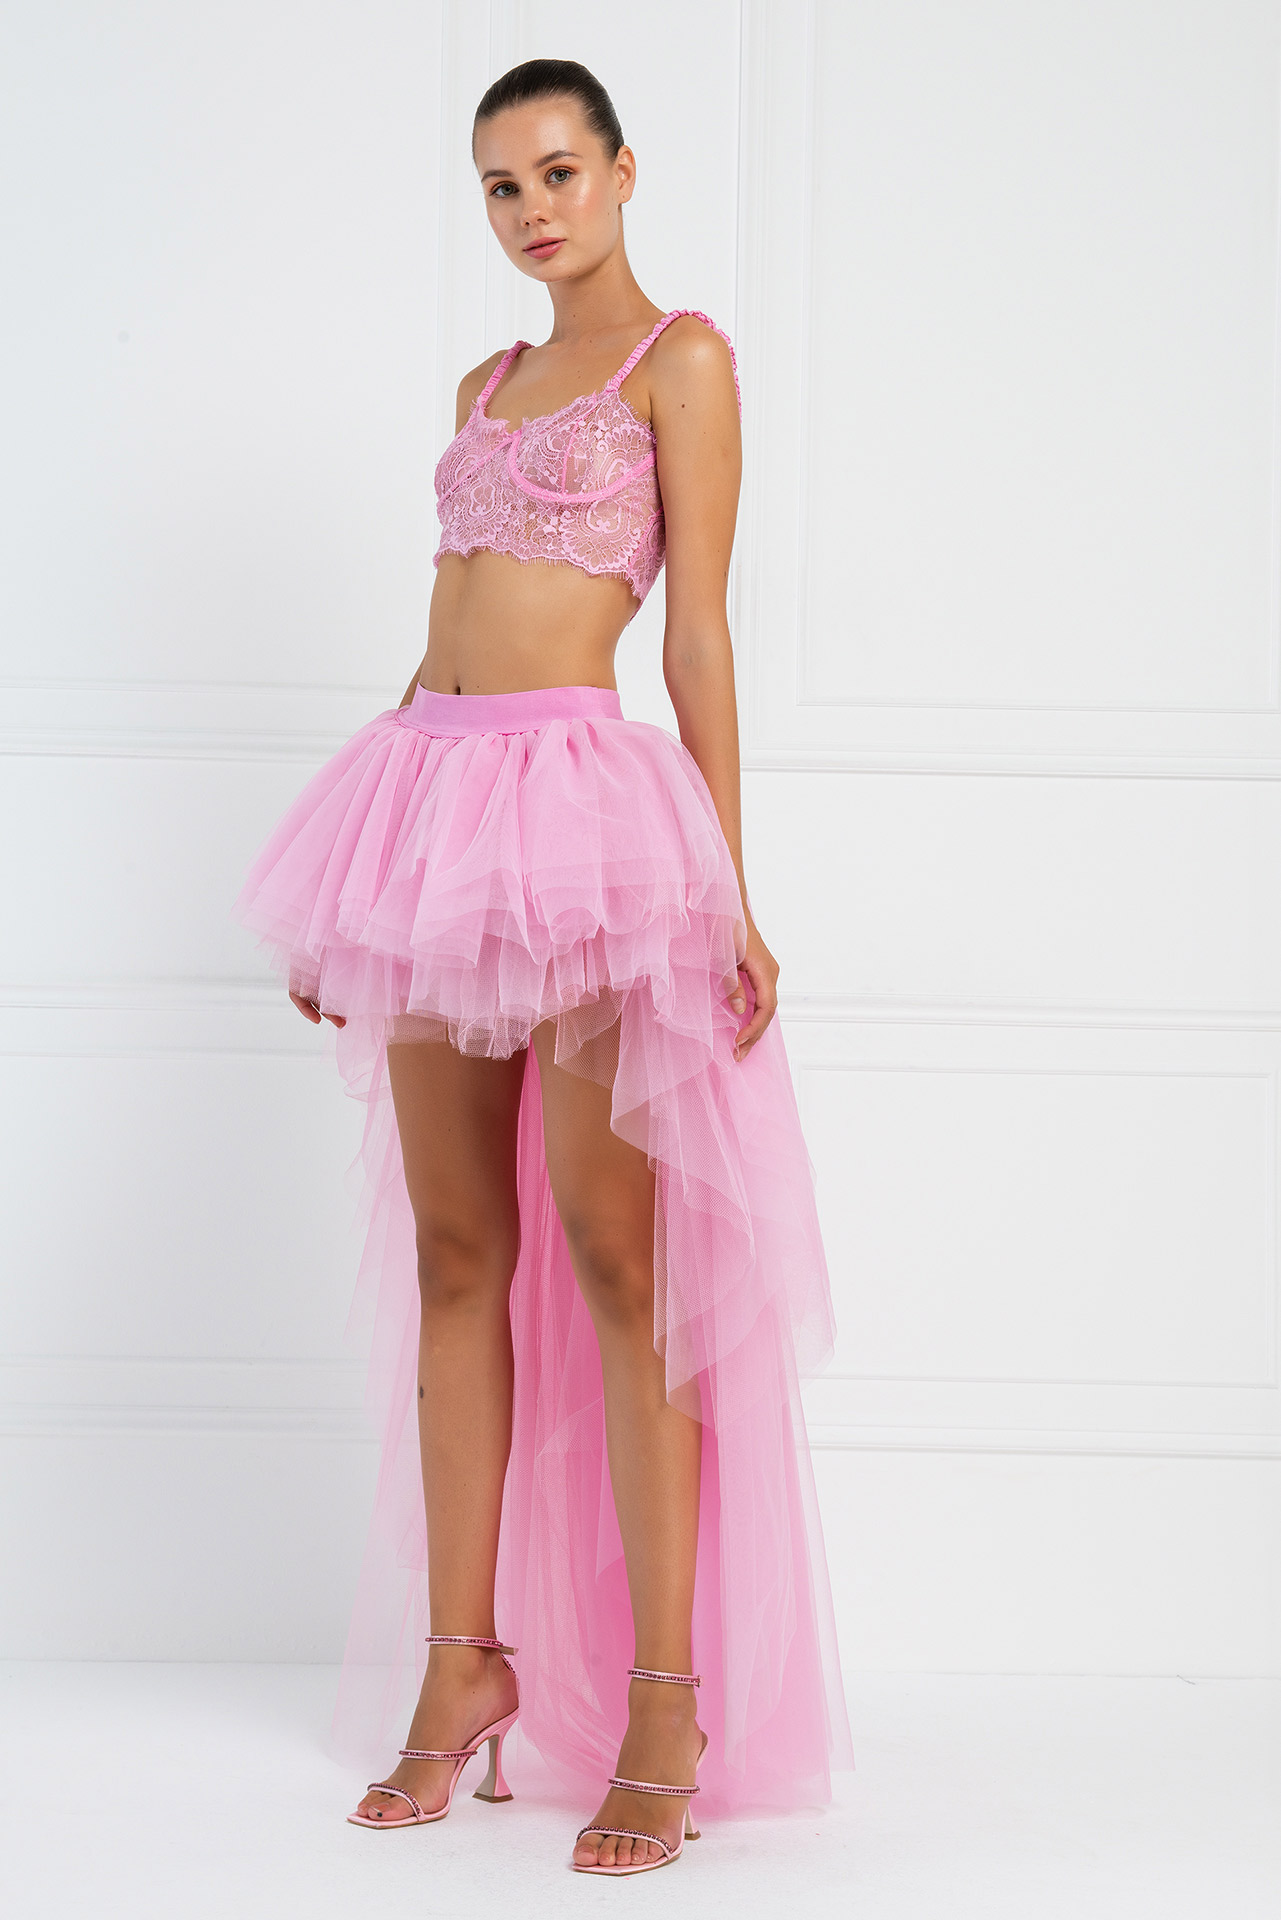 Wholesale High Low New Pink Tulle Skirt